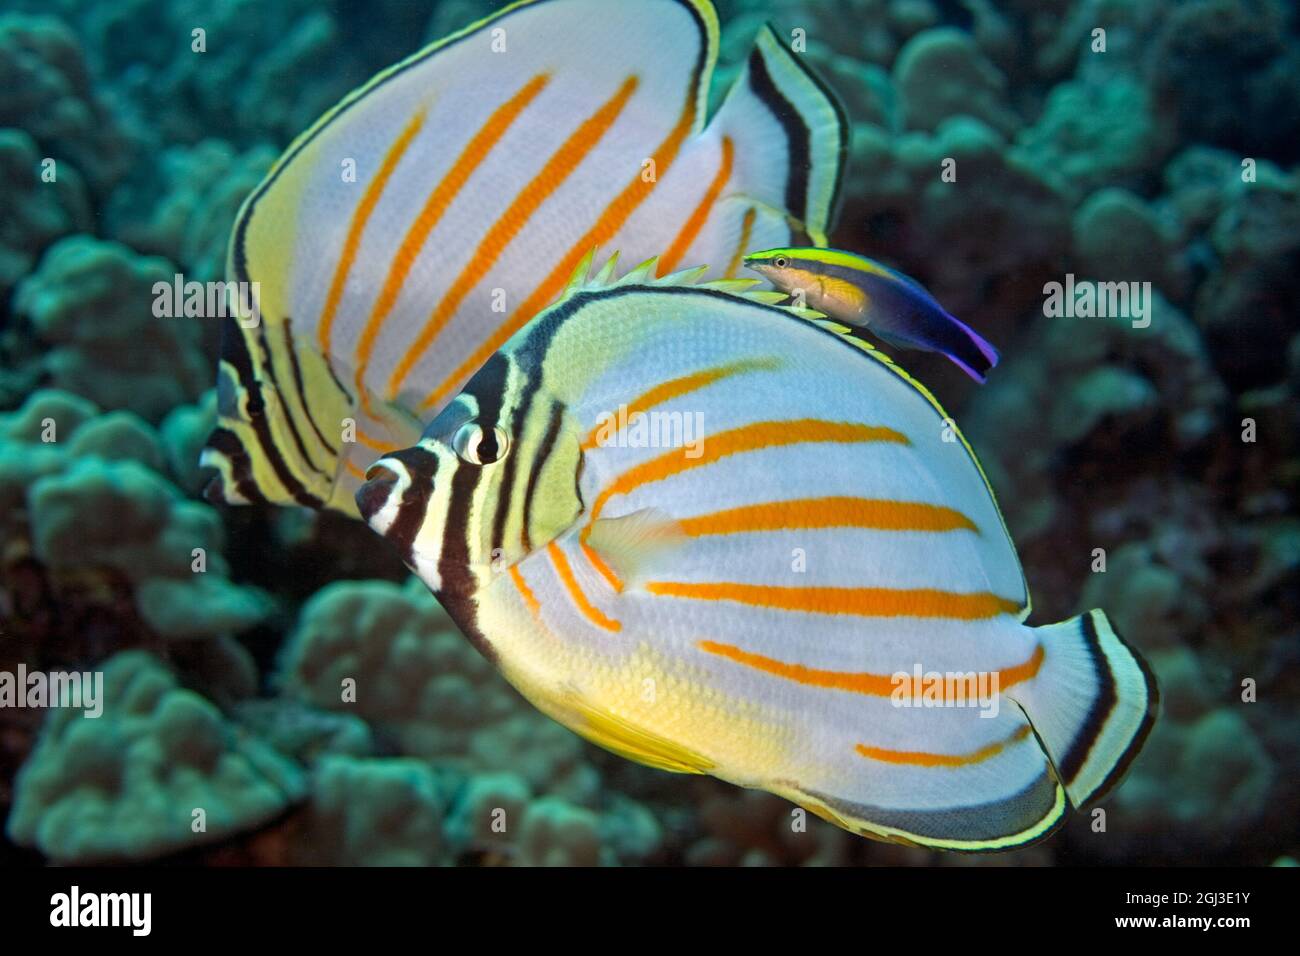 ornate butterflyfish, Chaetodon ornatissimus, being cleaned by a endemic Hawaiian cleaner wrasse, Labriodes phthirophagus, Kona Coast, Big Island, Haw Stock Photo